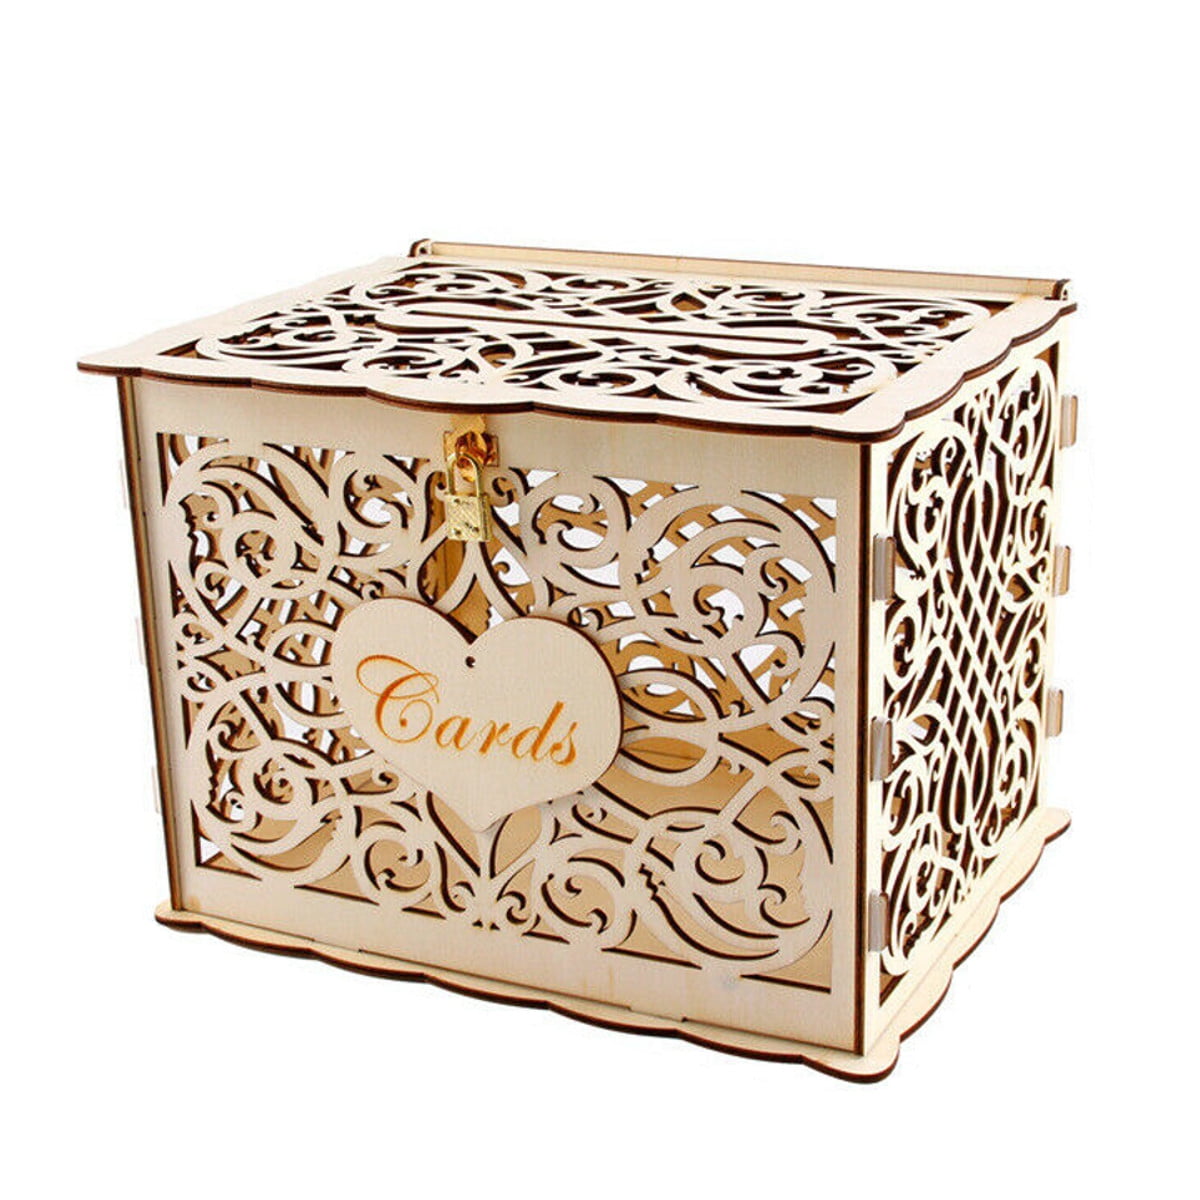 Wedding Card Boxes for reception/Personalized Card Box/Wedding Keepsake Box/Wood Card Box/Wedding Card Box with Slot/Card Box for Wedding